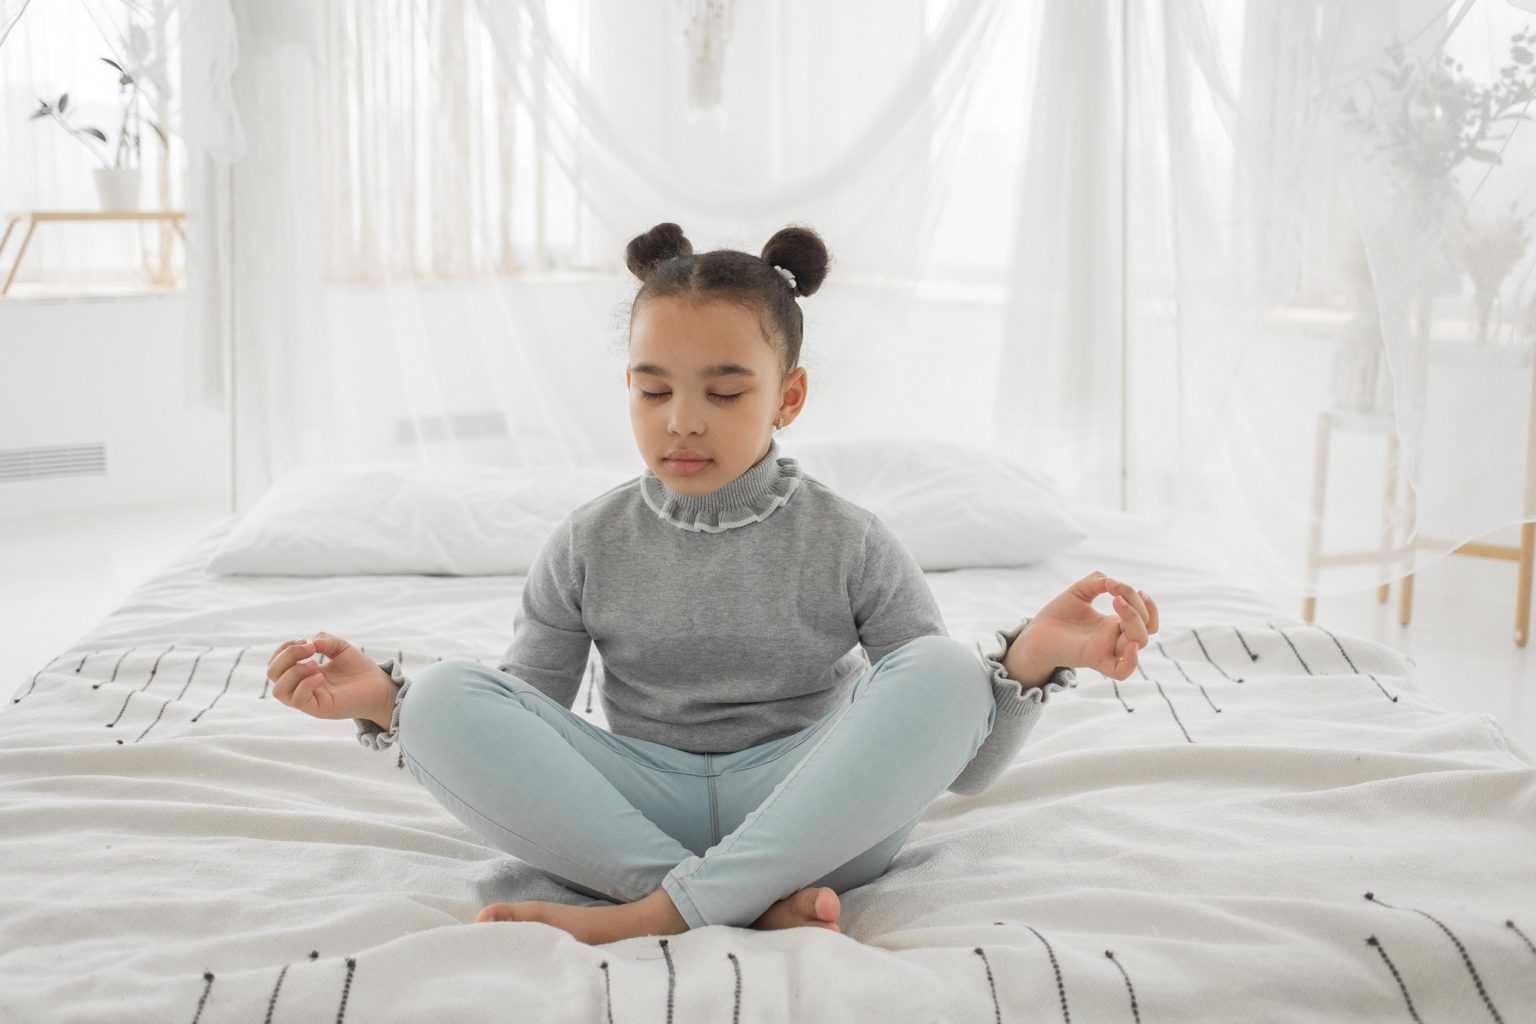 Girl sitting on the bed with legs crossed and hands out in meditation.